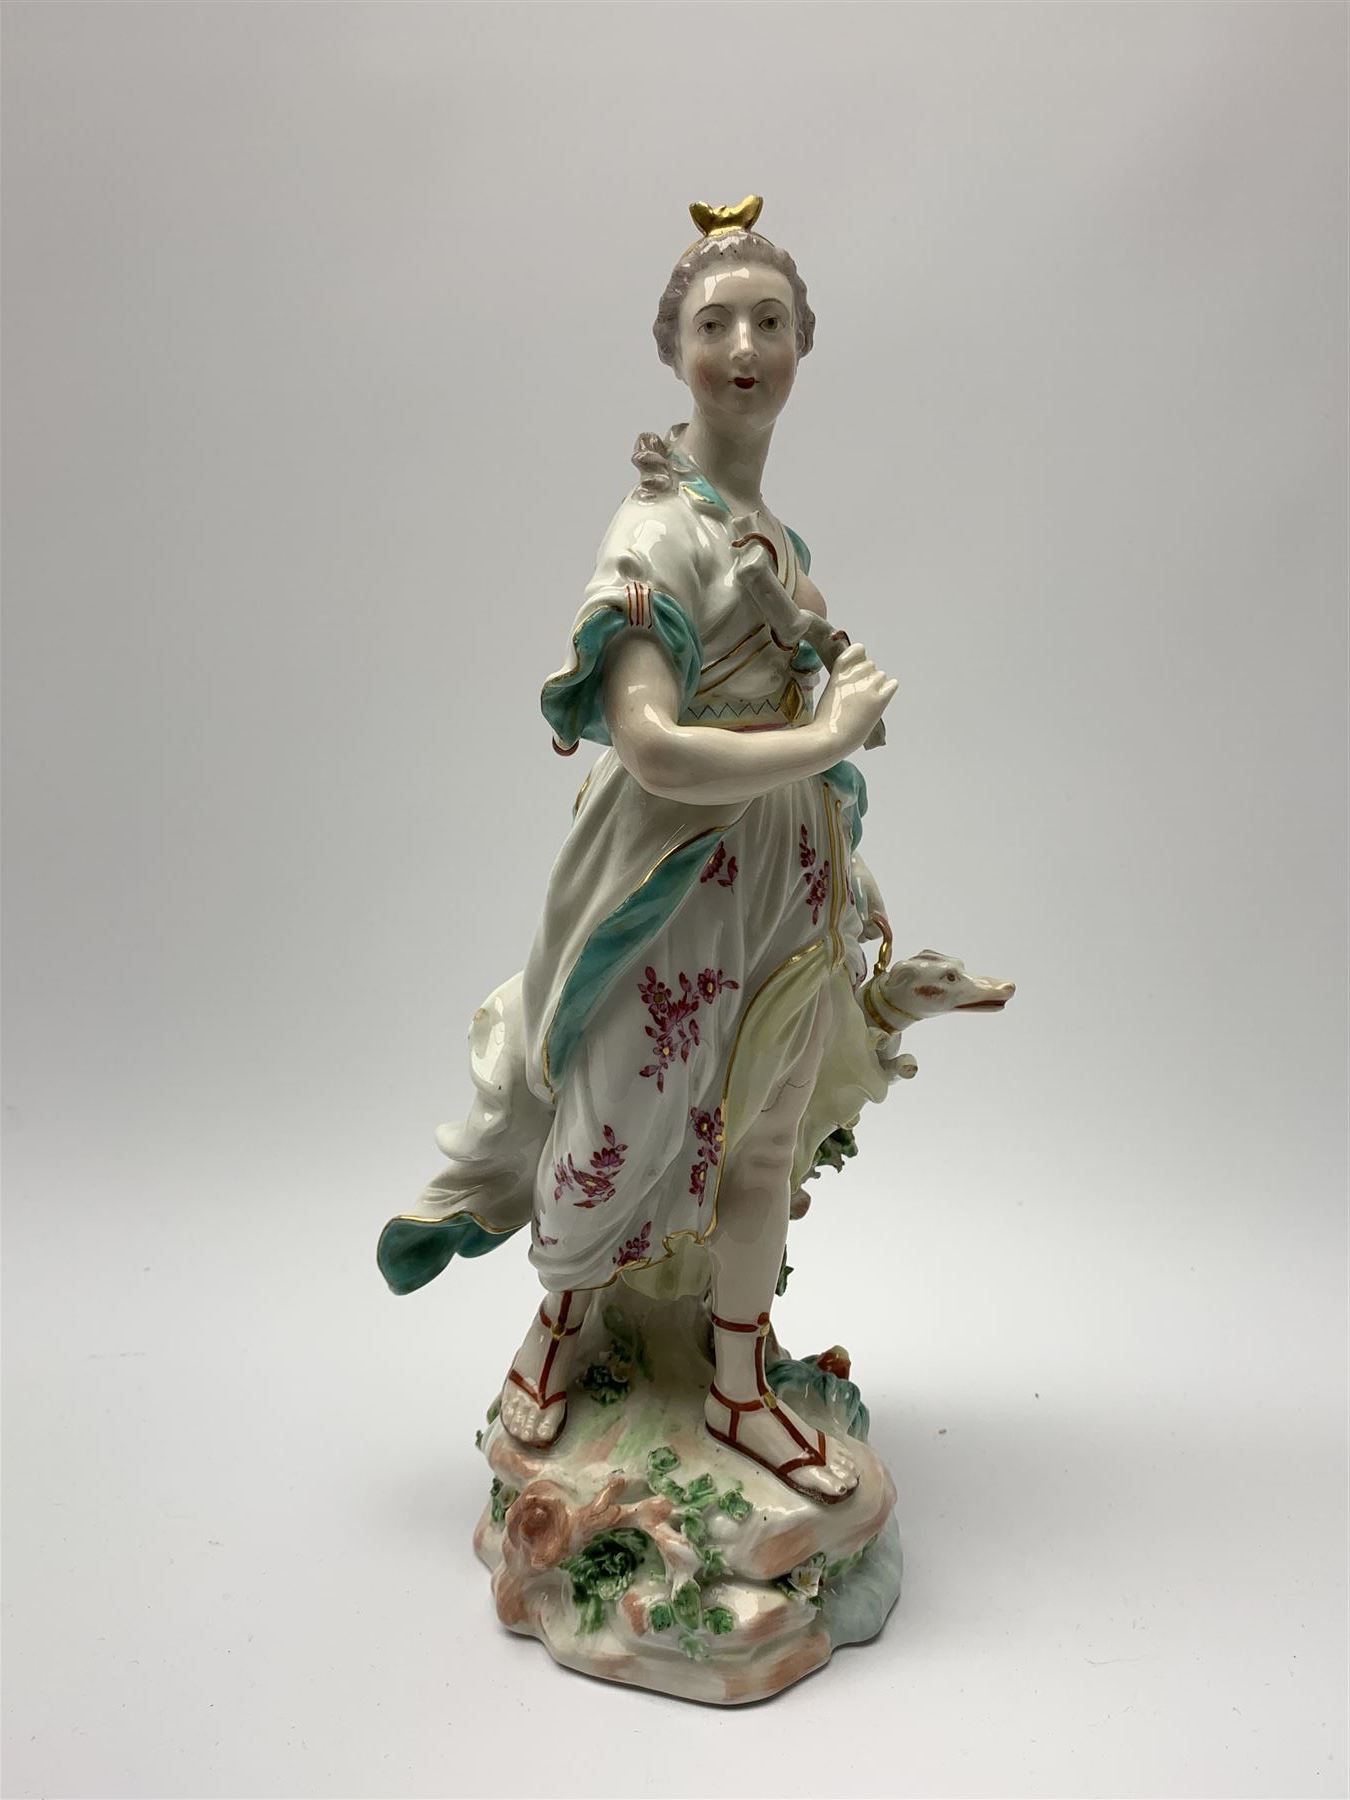 Mid 18th century Derby porcelain figure modelled as Dianna the Huntress - Image 7 of 9